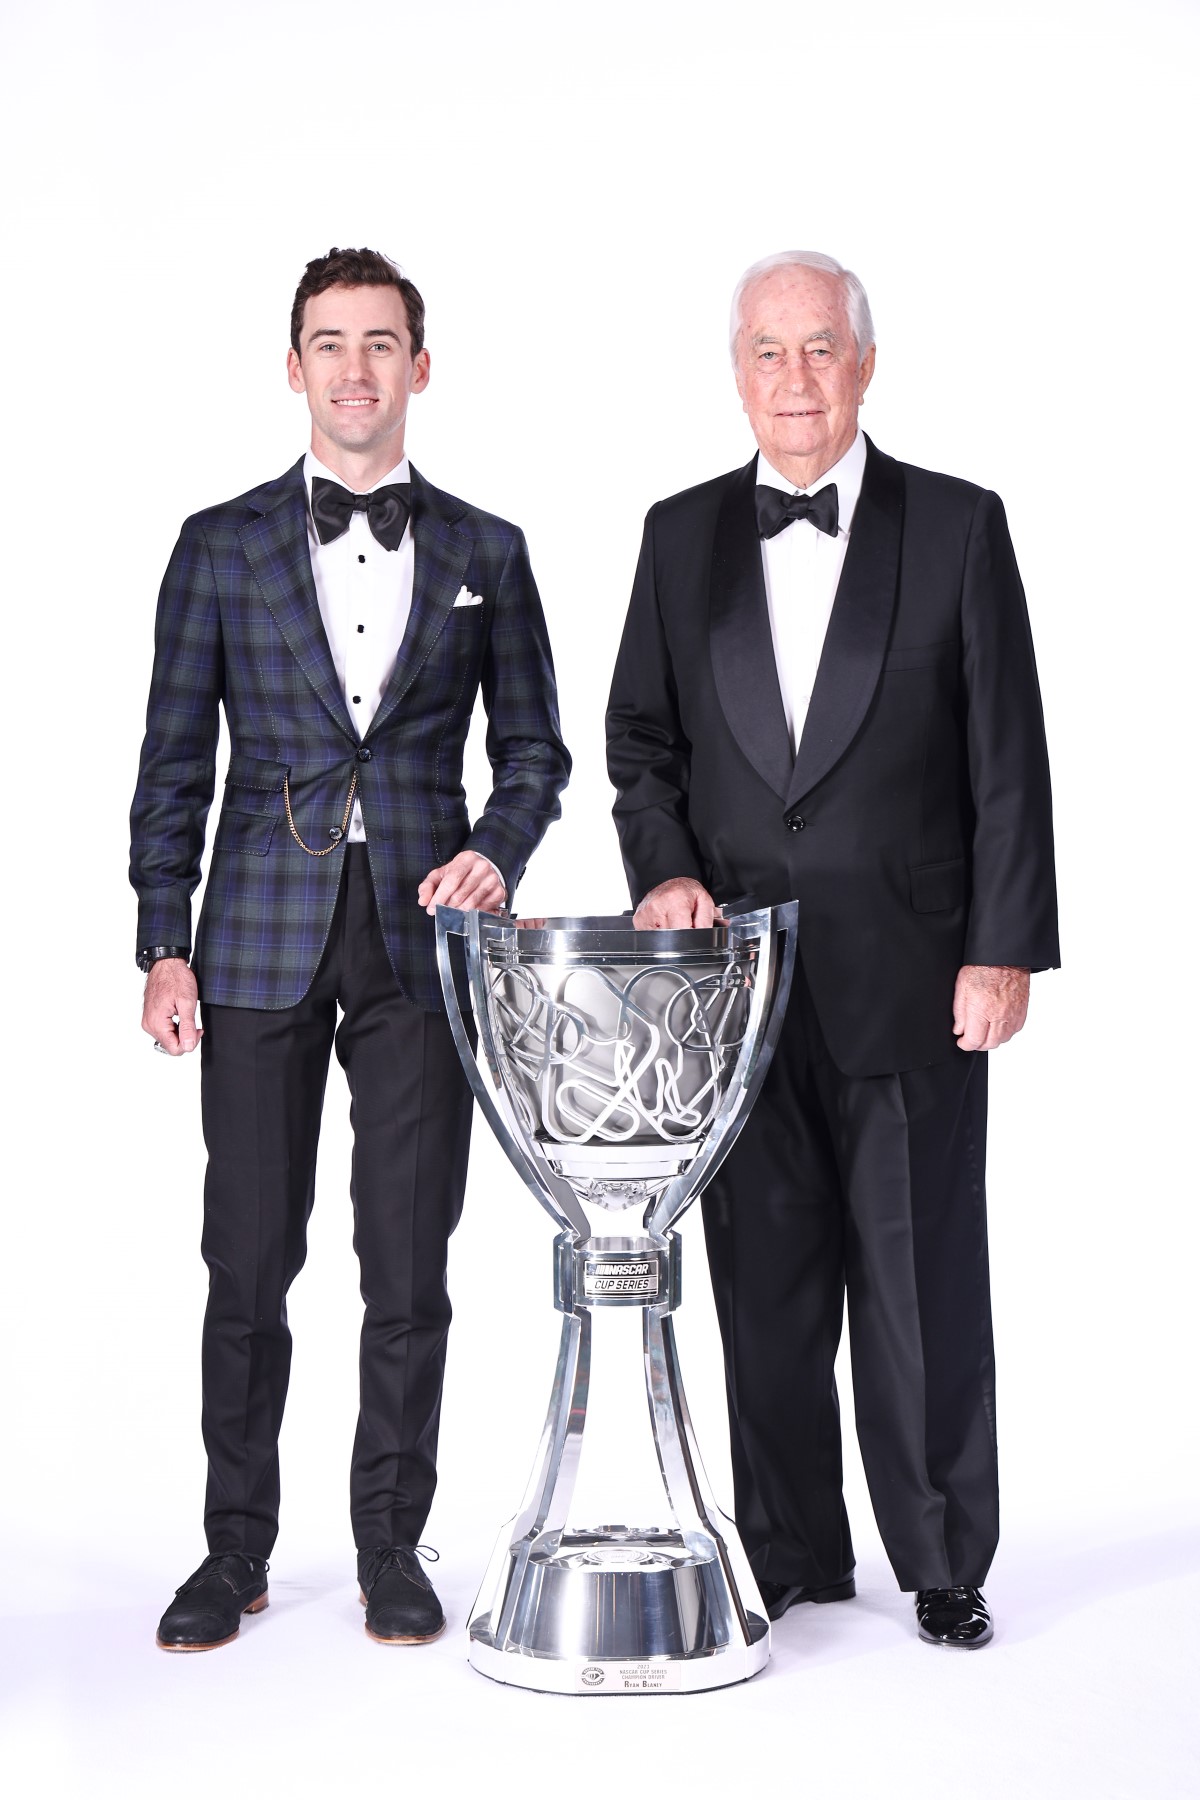 NASCAR Cup Series Champion, Ryan Blaney, and team owner, Roger Penske of Team Penske pose for photos with the Bill France NASCAR Cup Series Championship trophy prior to the NASCAR Awards and Champion Celebration at the Music City Center on November 30, 2023 in Nashville, Tennessee. (Photo by Jared C. Tilton/Getty Images)